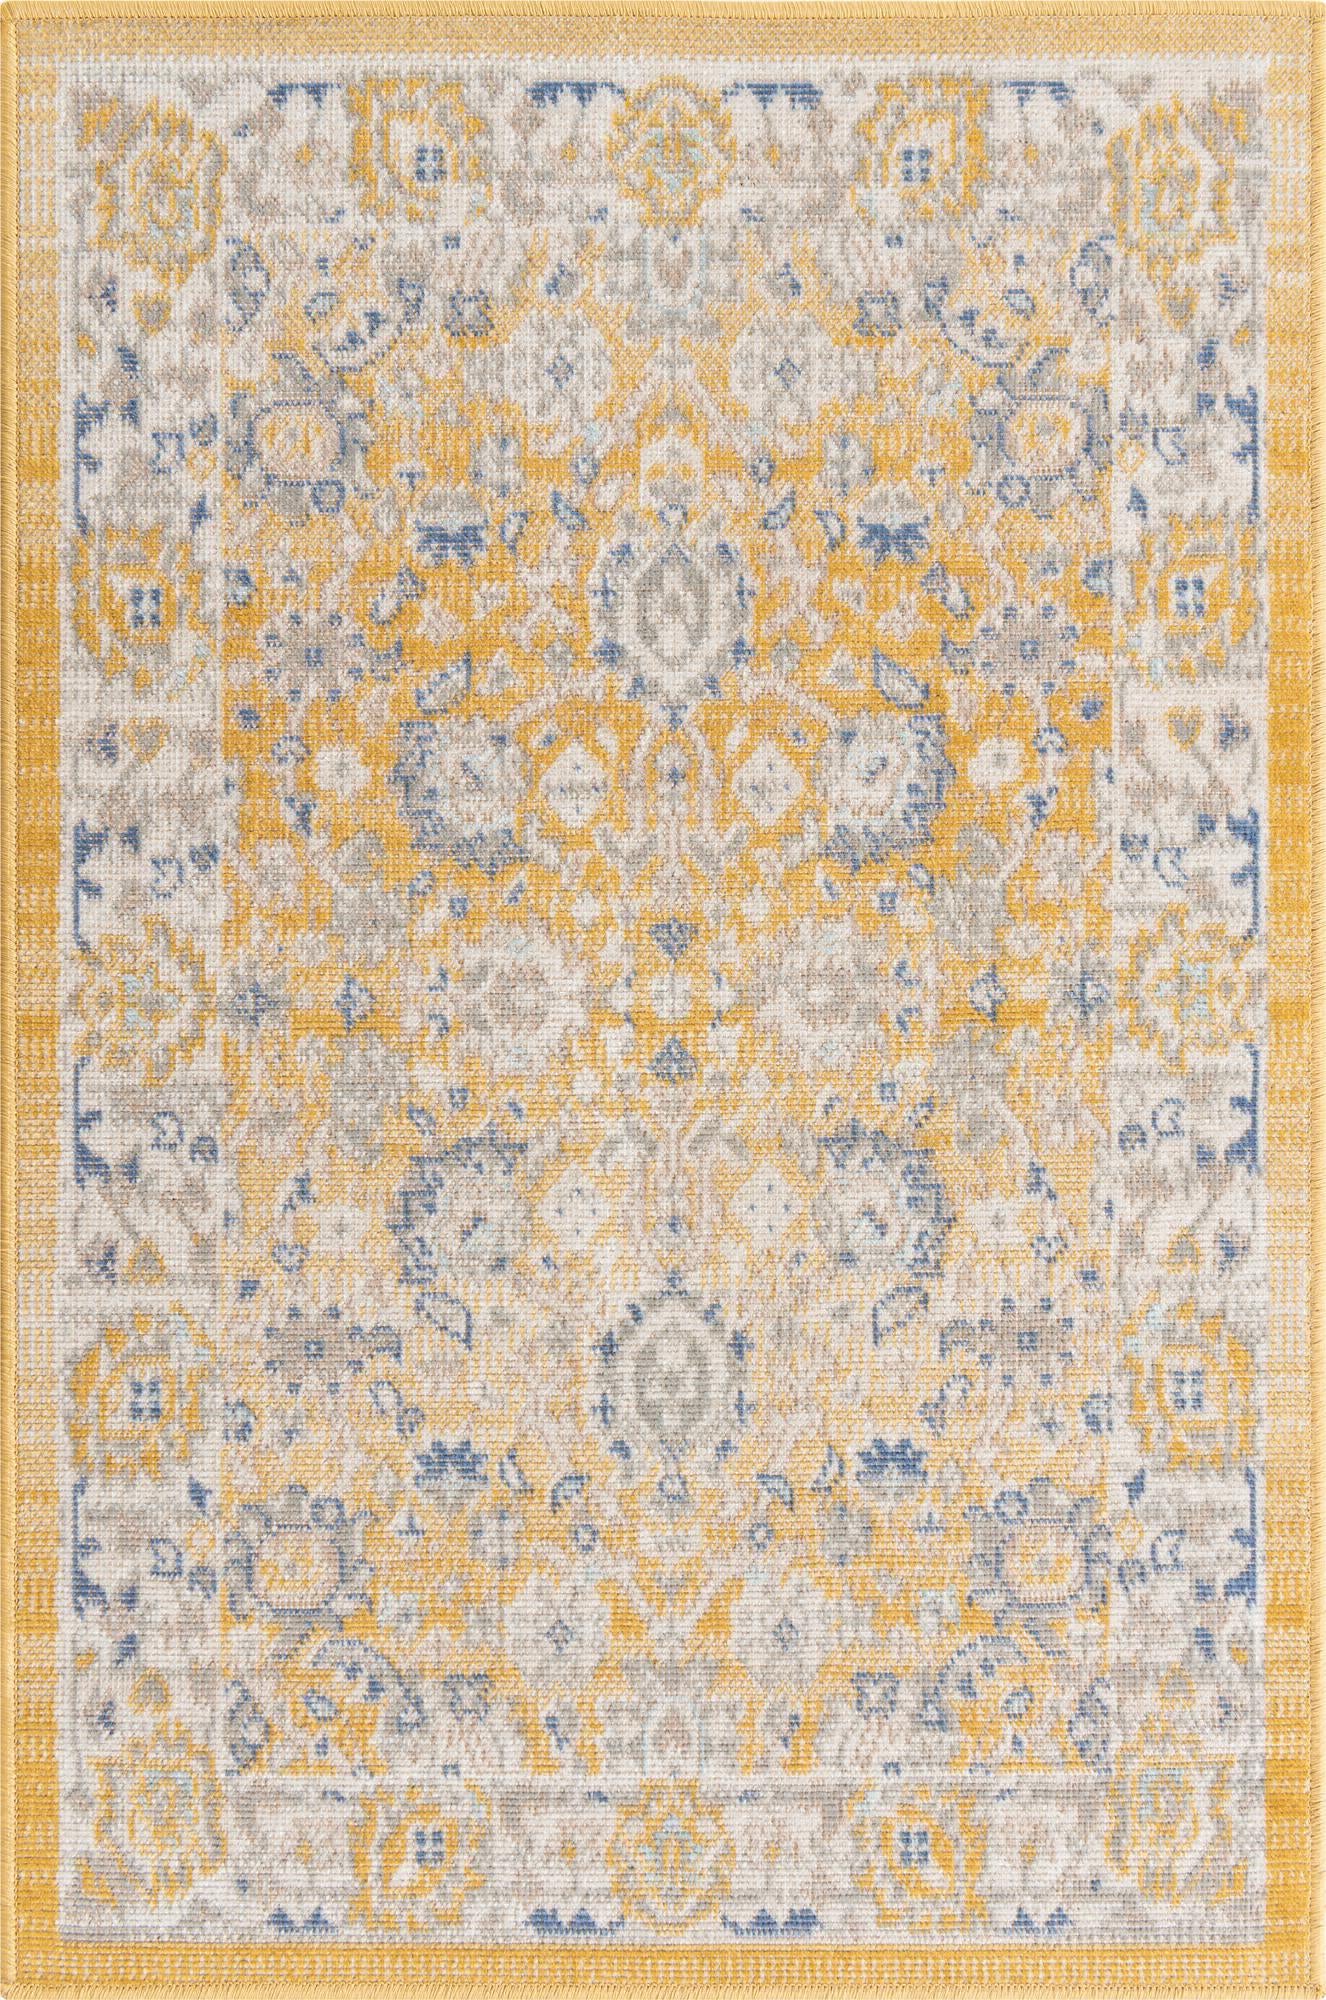 Unique Loom Whitney T-WHIT3 Tuscan Yellow Area Rug main image